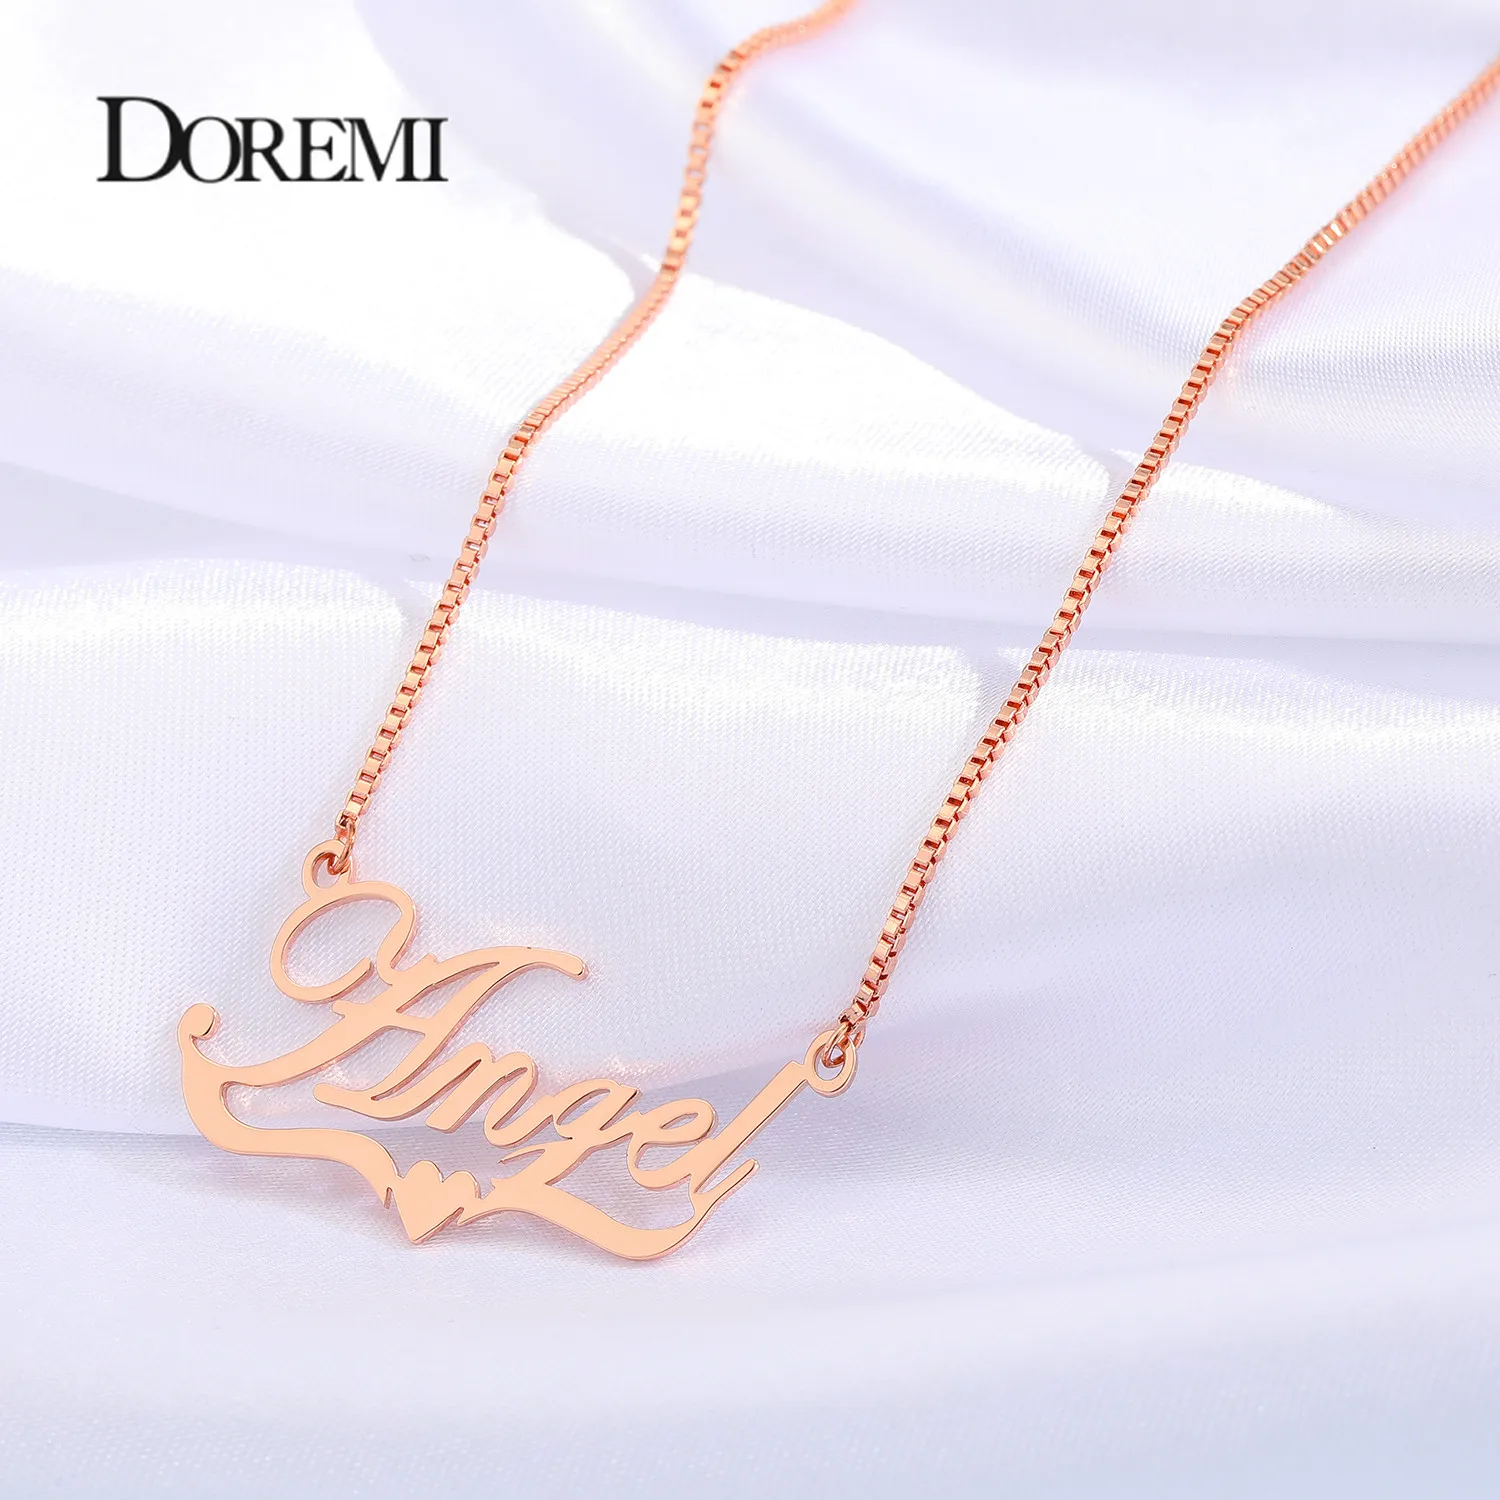 DOREMI Stainless Steel  Custom Name Necklace Personalized Name Pendant Heart Choker for Women Men Jewelry Valentine's Day Gift